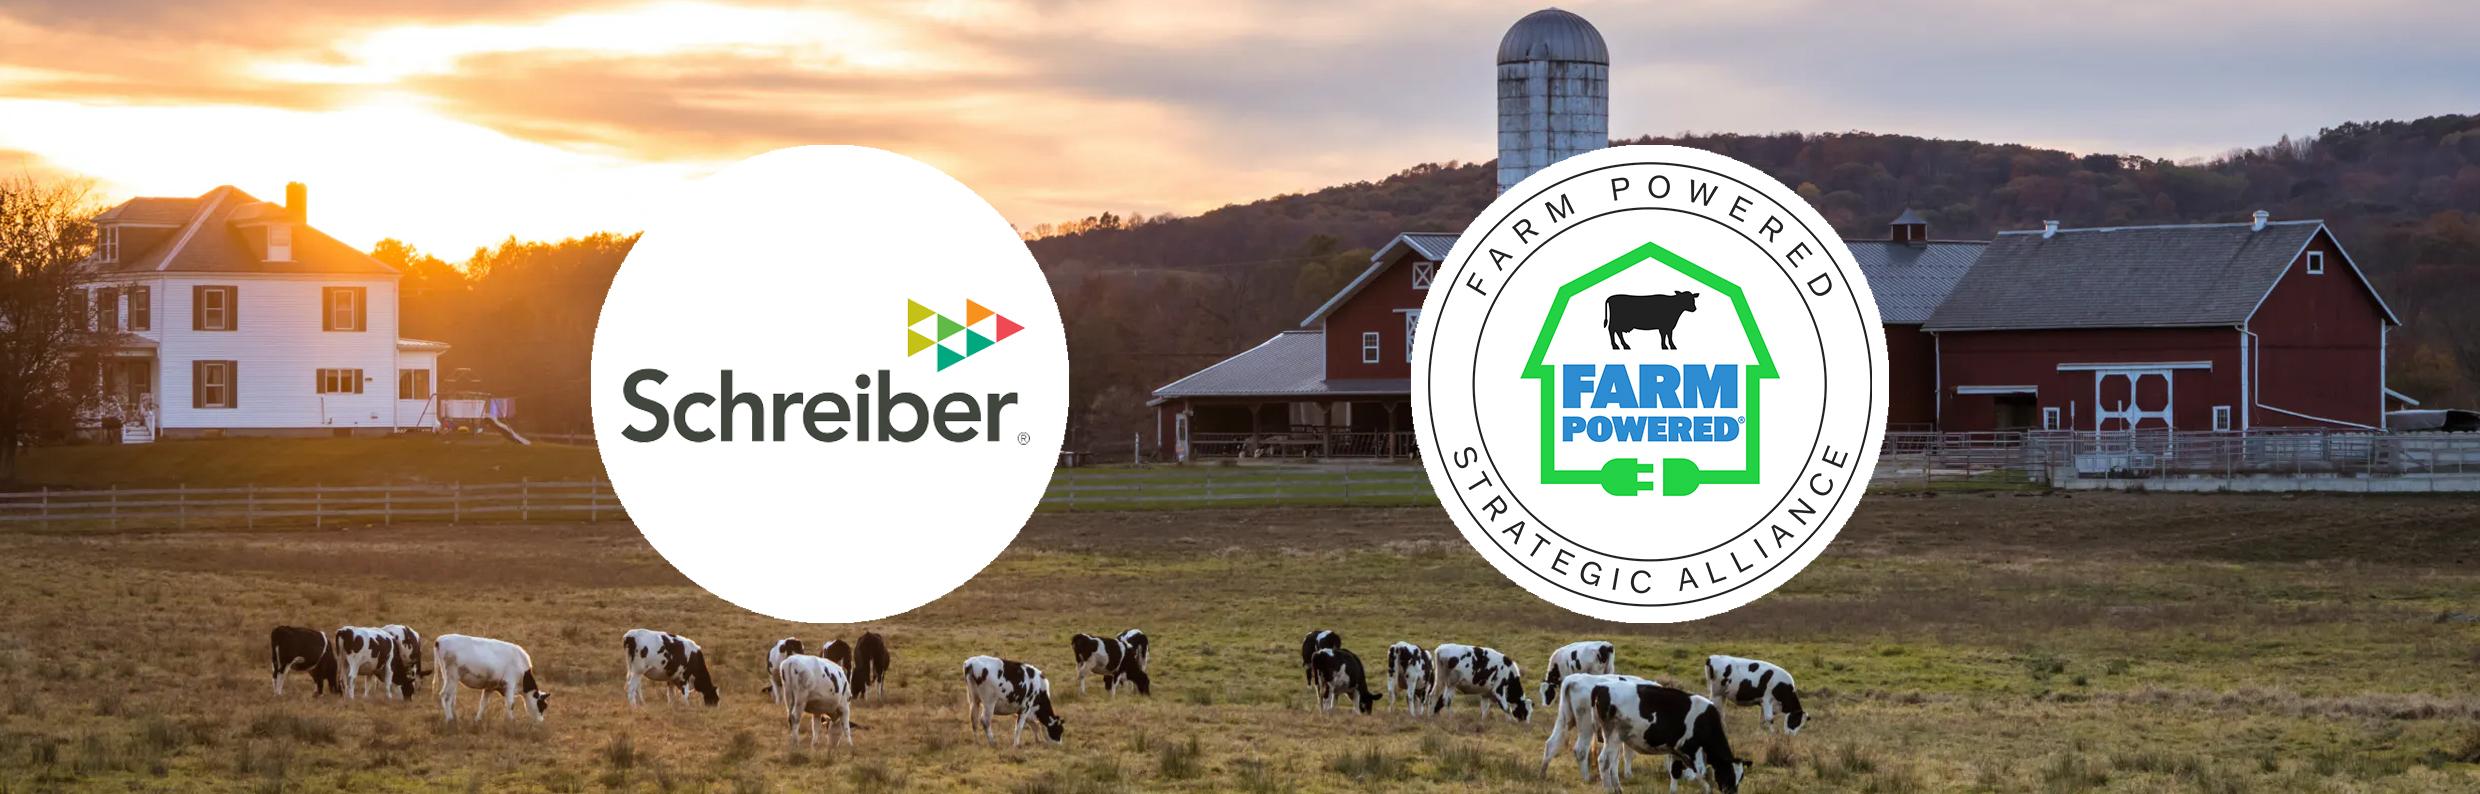 Logos of Schreiber and Farm Powered Strategic Alliance, with a background image of a farm using anaerobic digestion